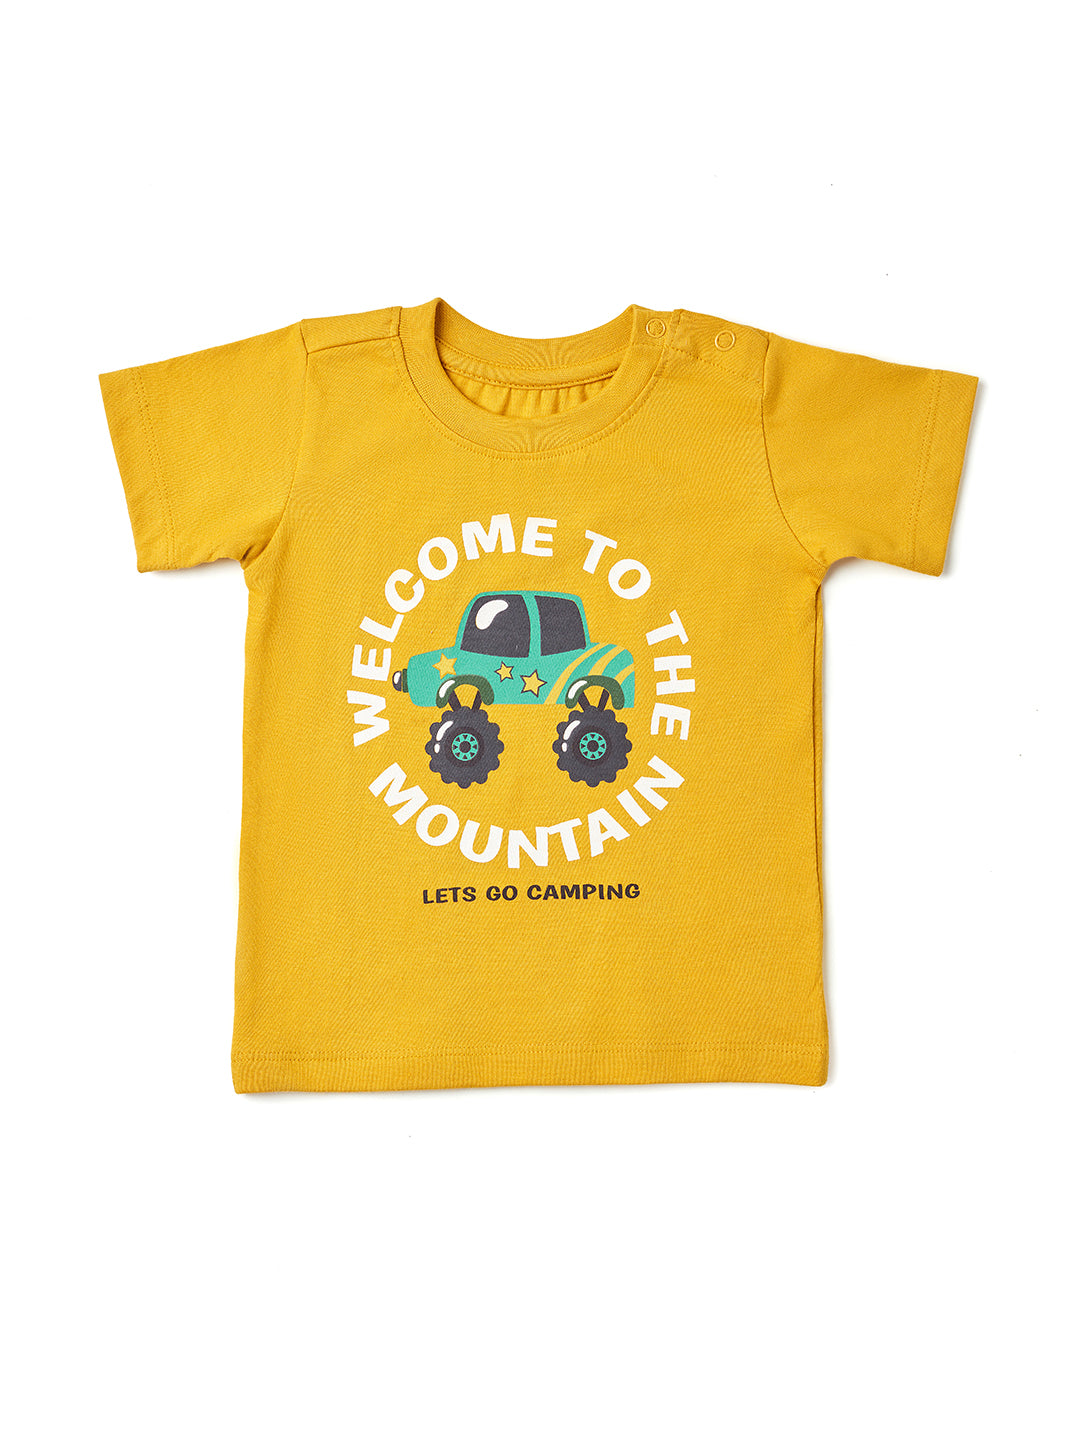 Boys Round Neck T-Shirts Half Sleeve - Mustered with Colorful Mountain Truck Print